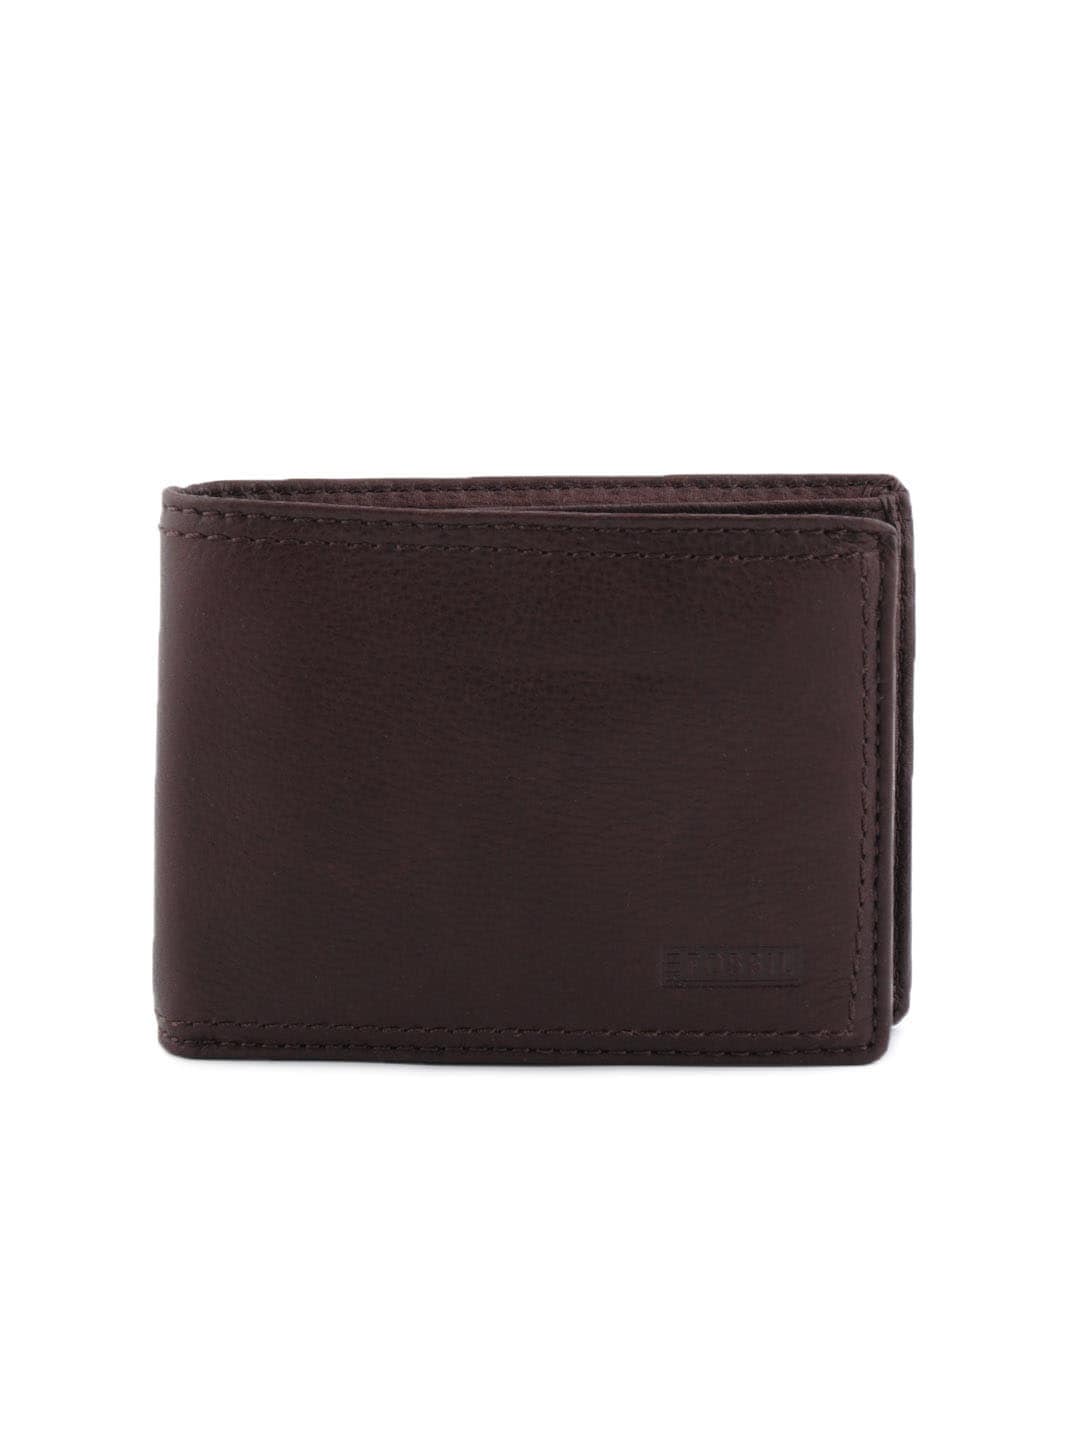 Fossil Men Midway Brown Wallet